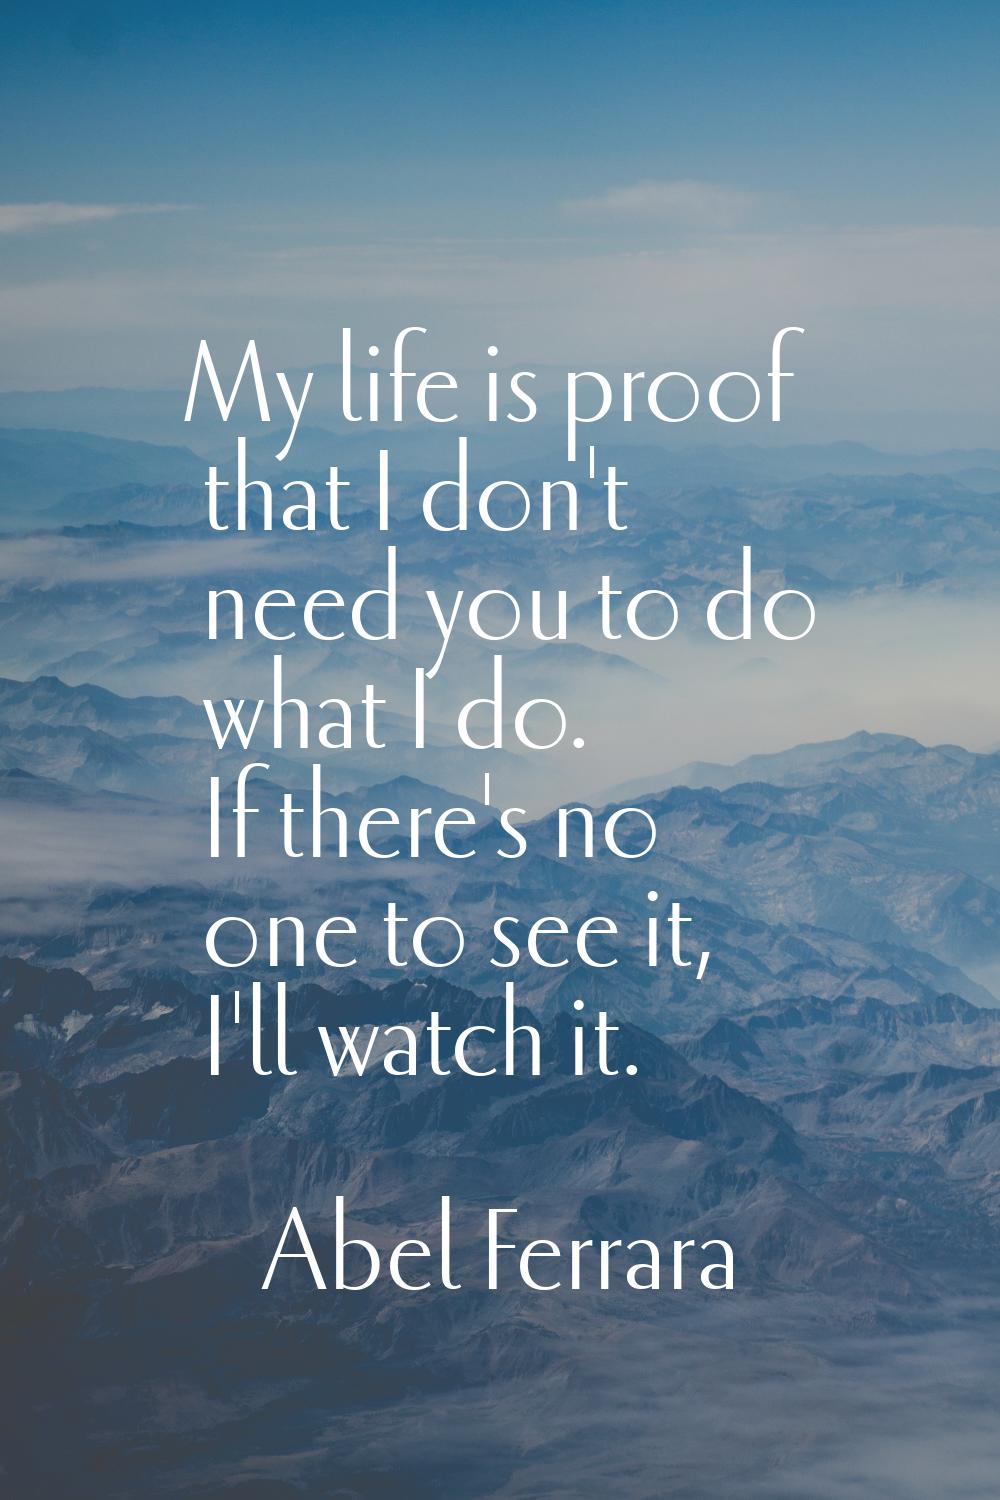 My life is proof that I don't need you to do what I do. If there's no one to see it, I'll watch it.